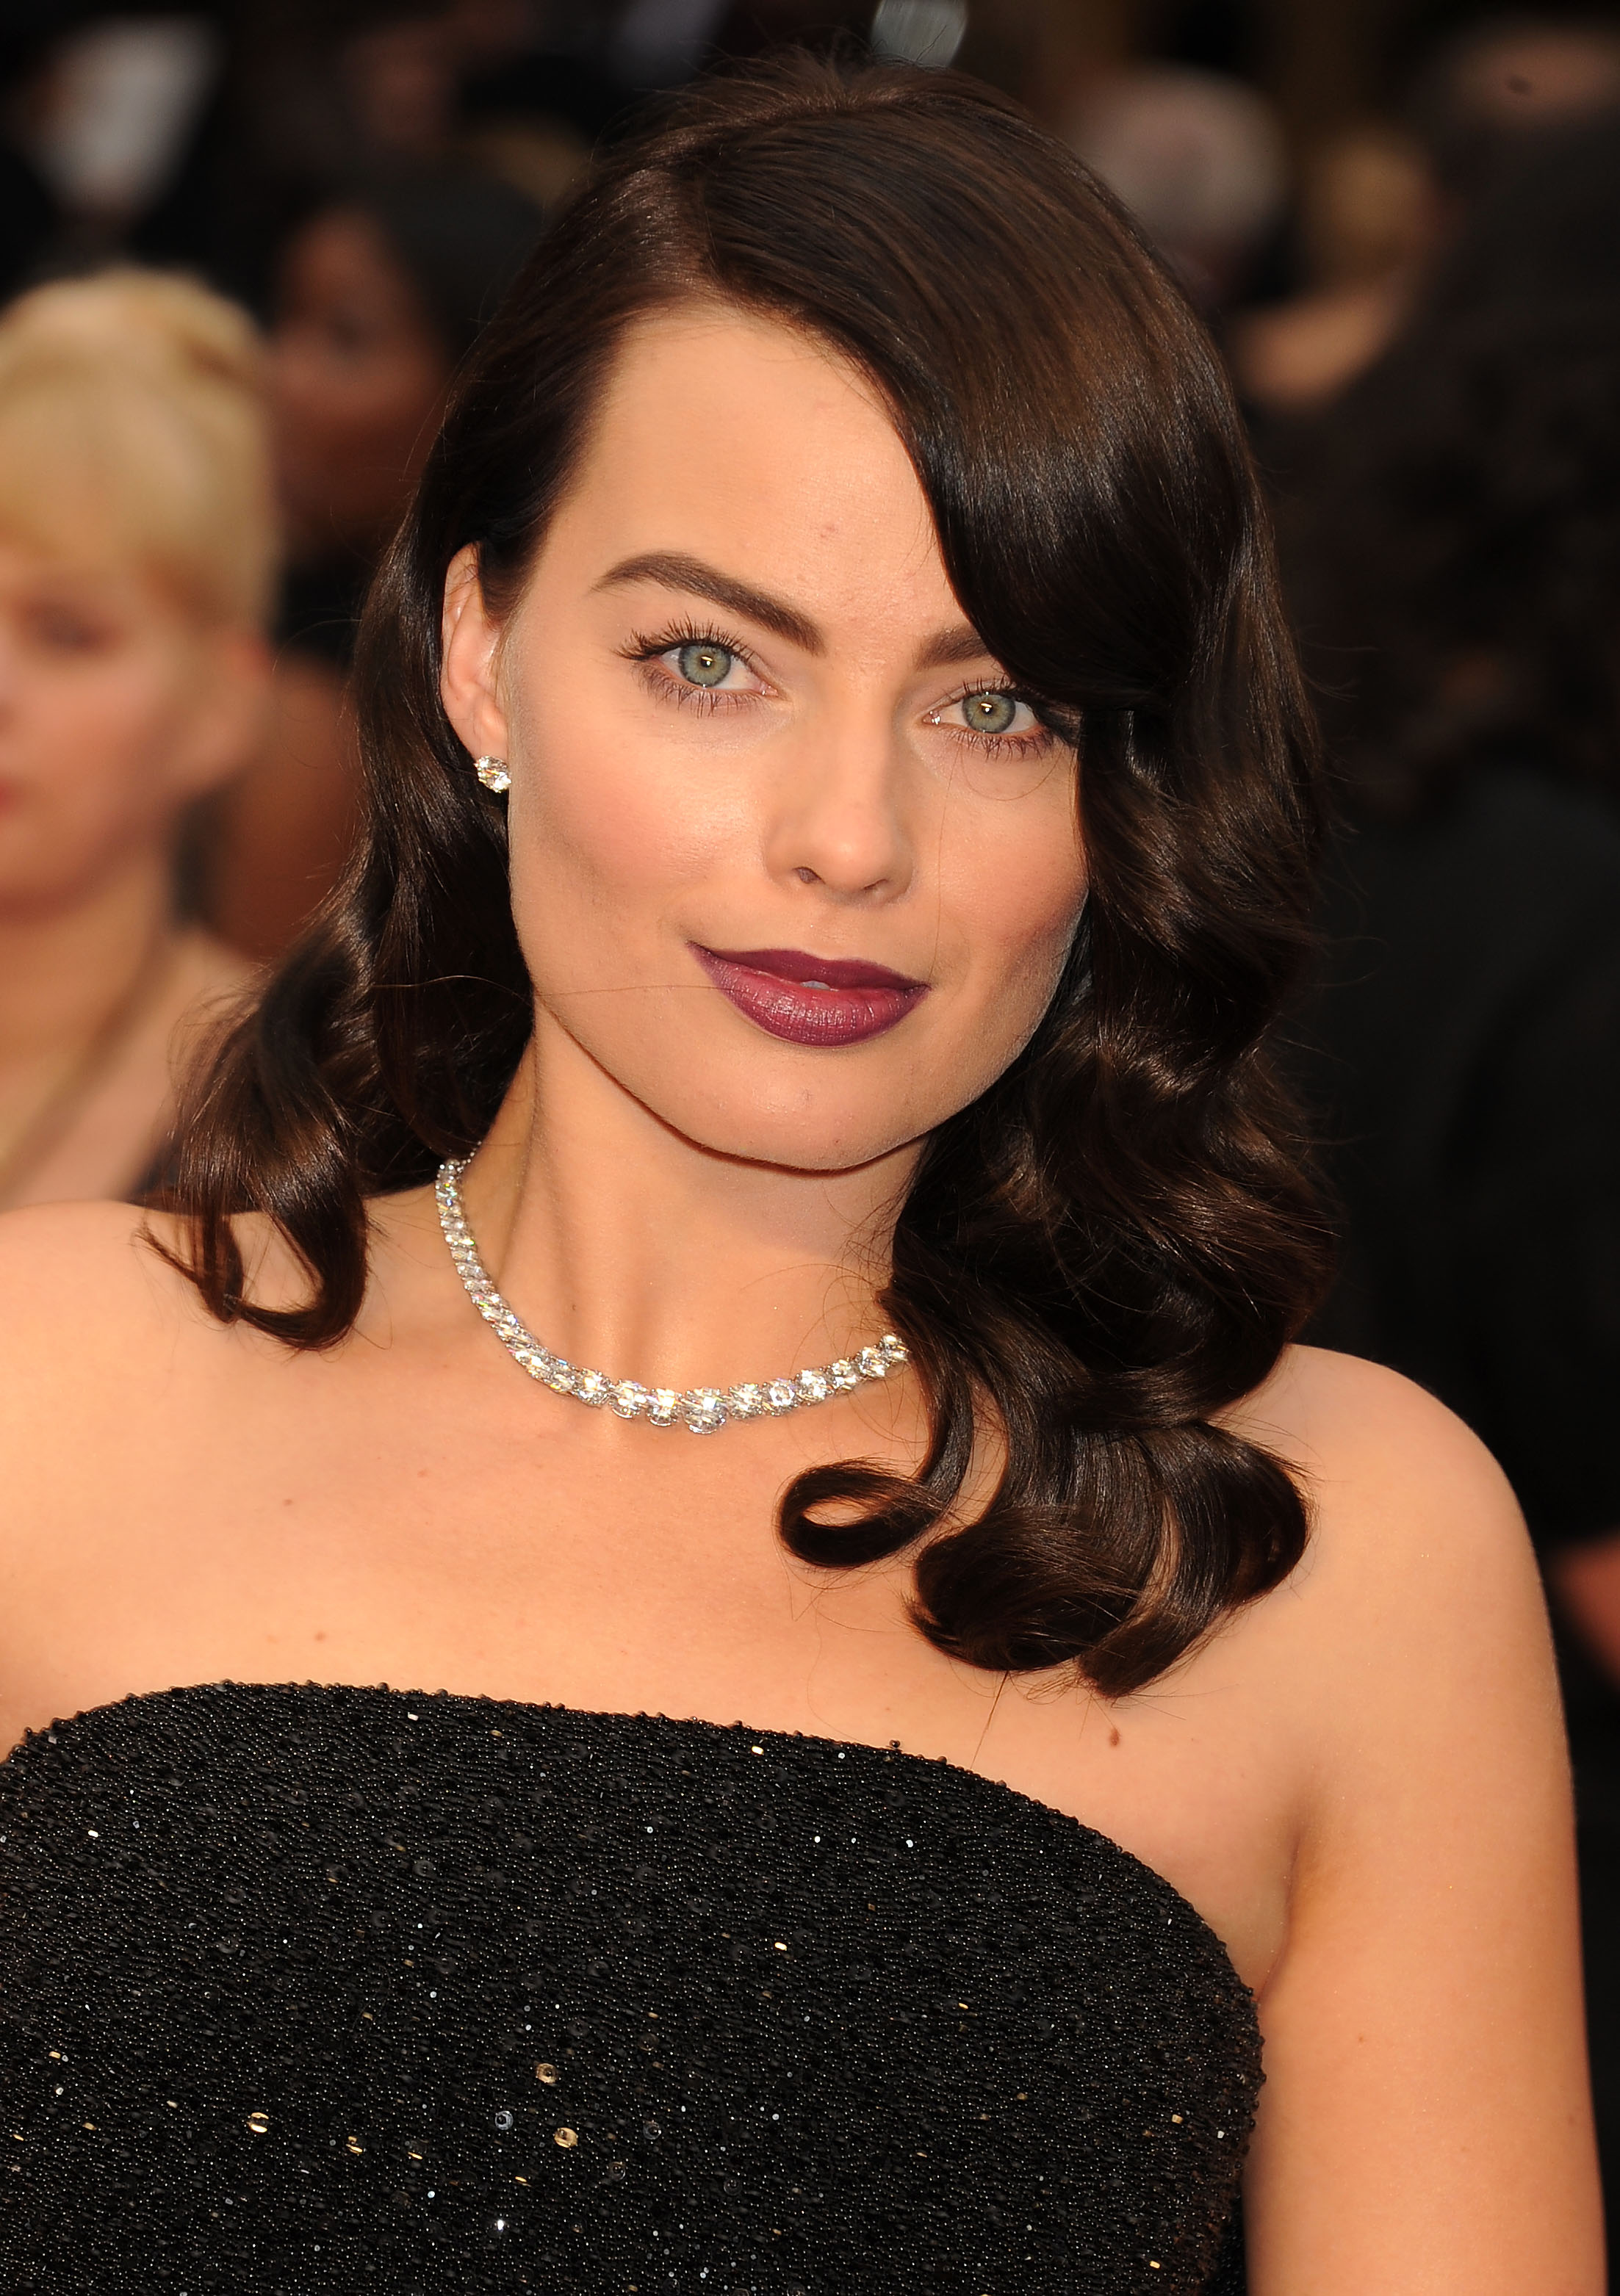 Margot Robbie attends the 86th Annual Academy Awards on March 2, 2014 in Hollywood, California | Source: Getty Images